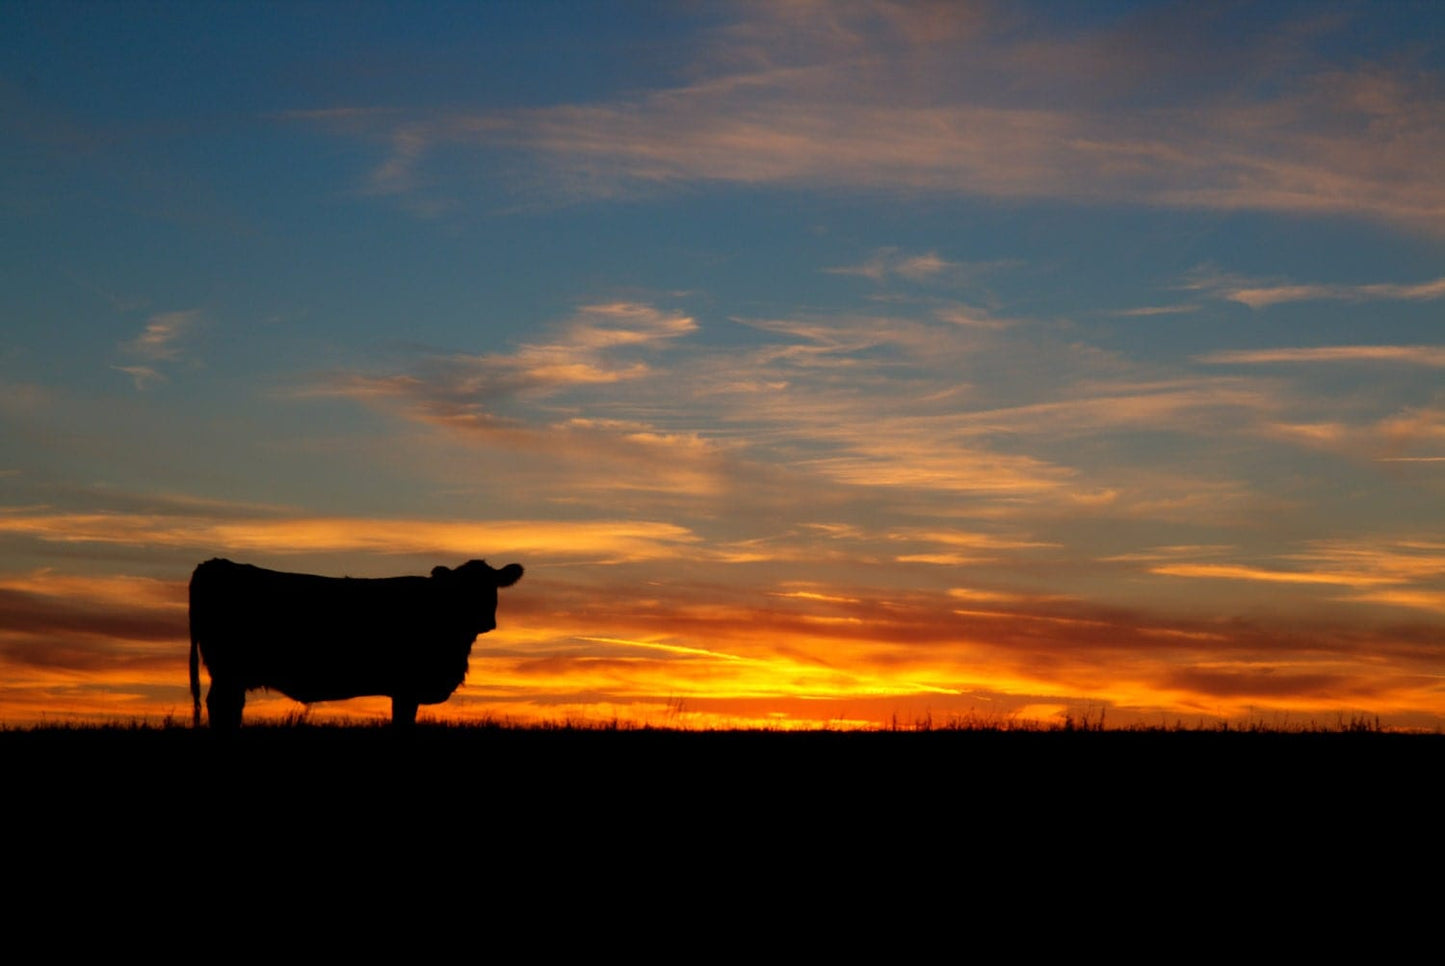 Teri James Photography Wall Art Paper Photo Print / 12 x 18 Inches Black Angus Cow at Sunset Colorful Canvas Print